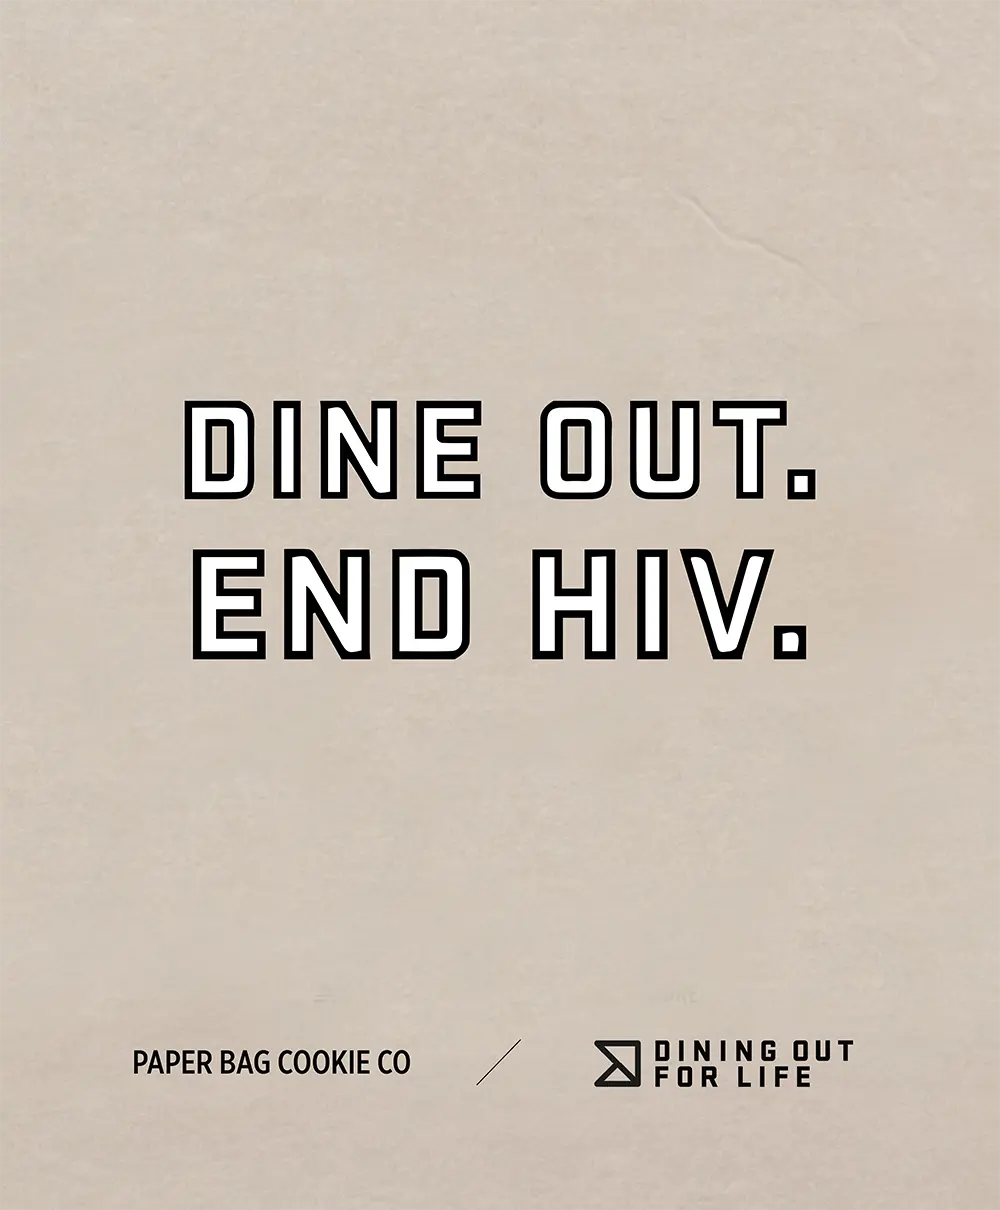 Dine out for life